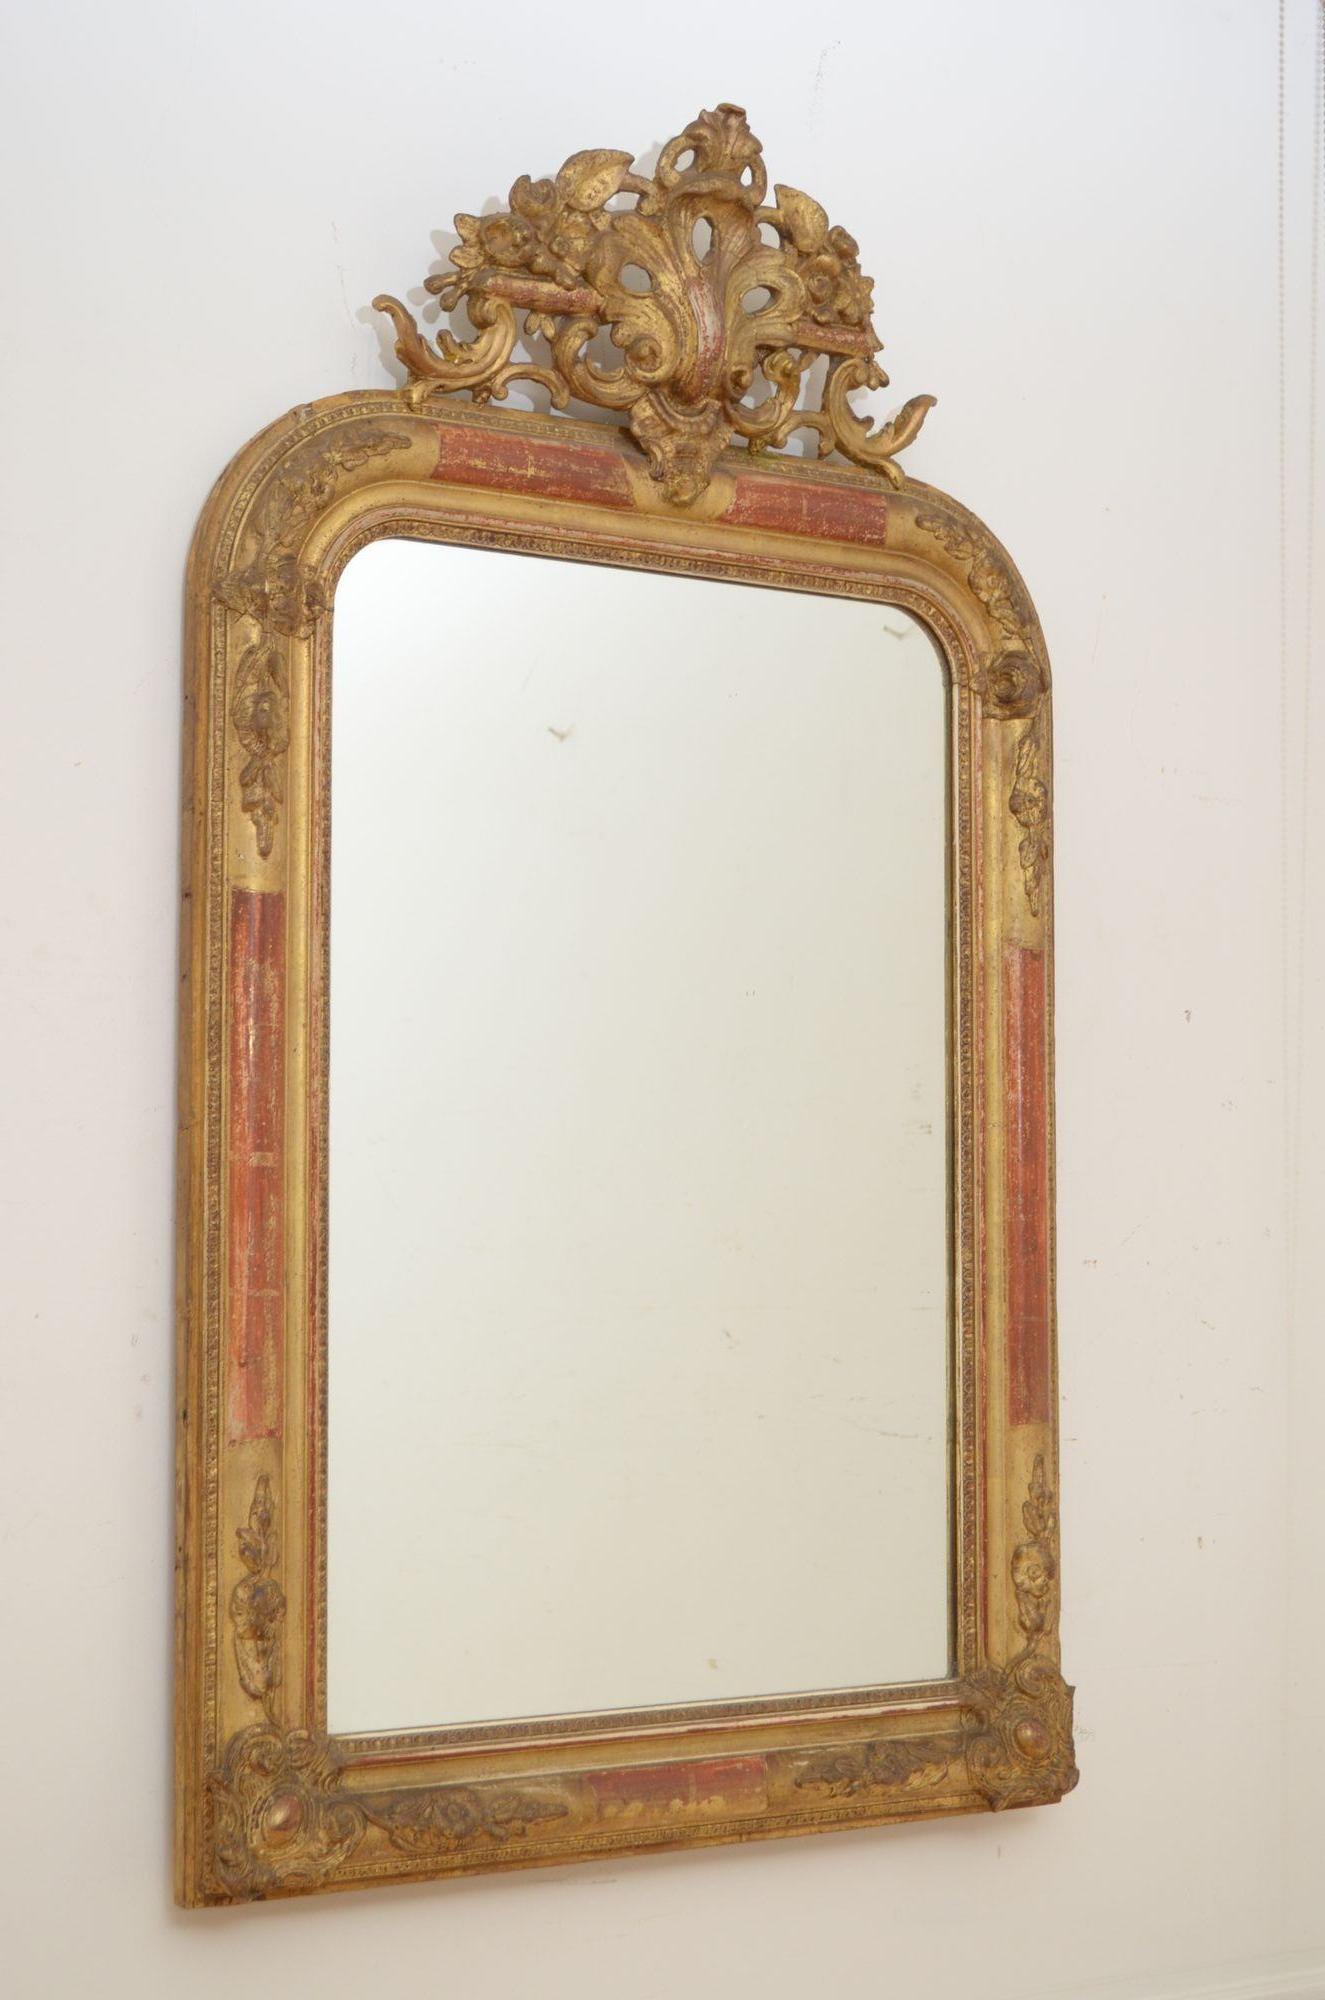 P0102 Fine XXth century French giltwood wall mirror, having original mirror plate with minor imperfections is gilded and moulded gesso frame with decorative floral corners to the top and bottom and elaborate pierced crest with carved flowers and